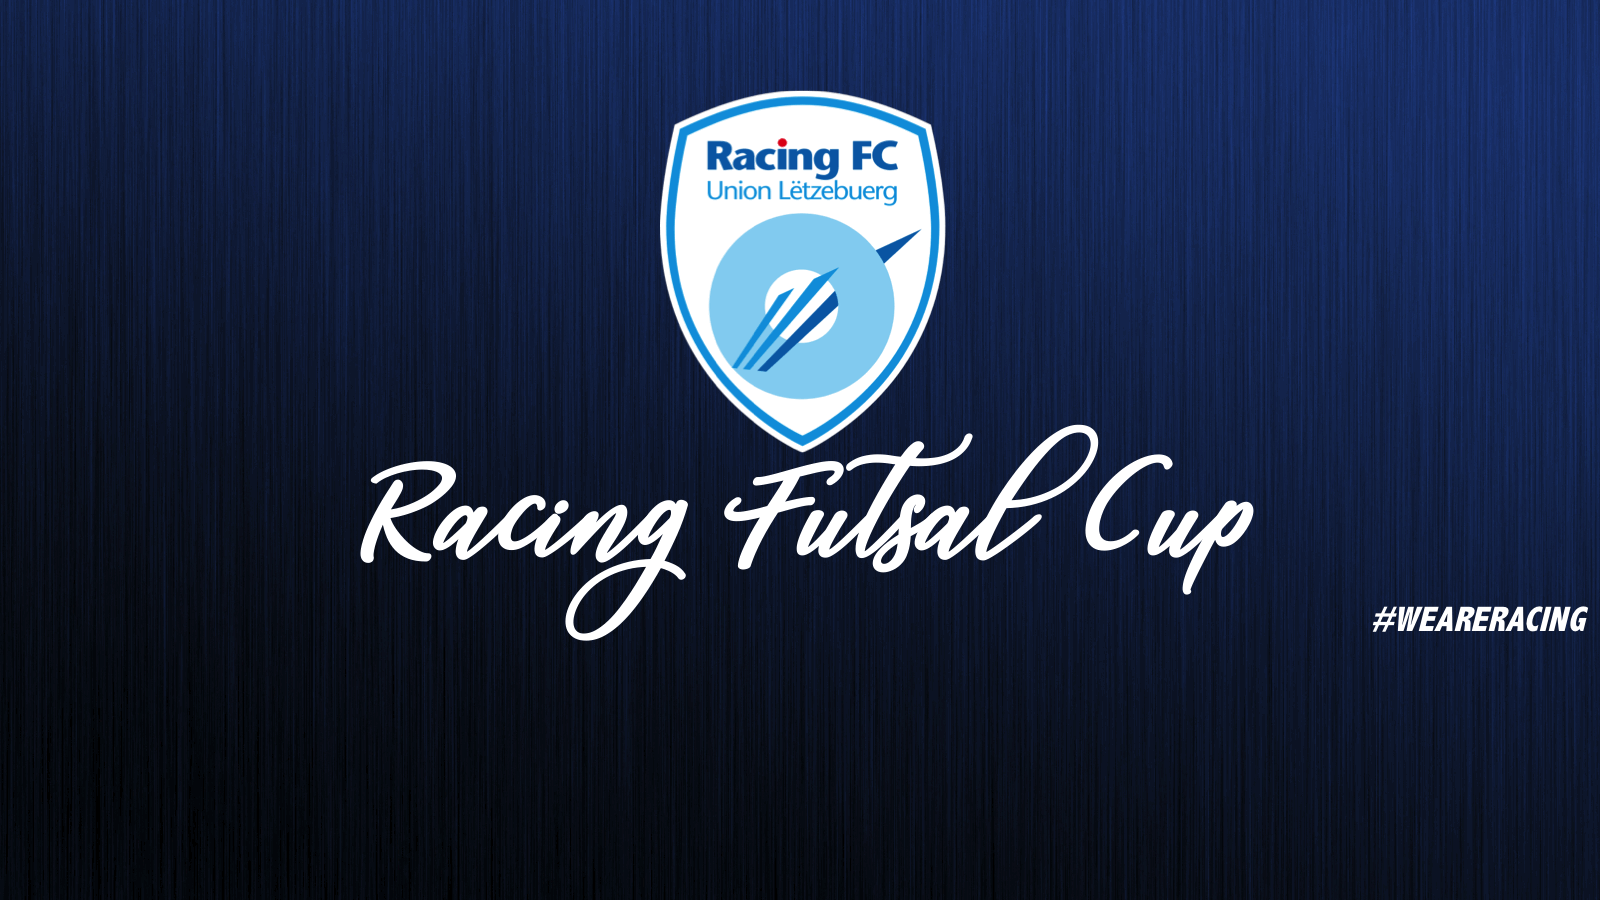 RACING FUTSAL CUP 2020 - FAMILLES D'ACCUEIL